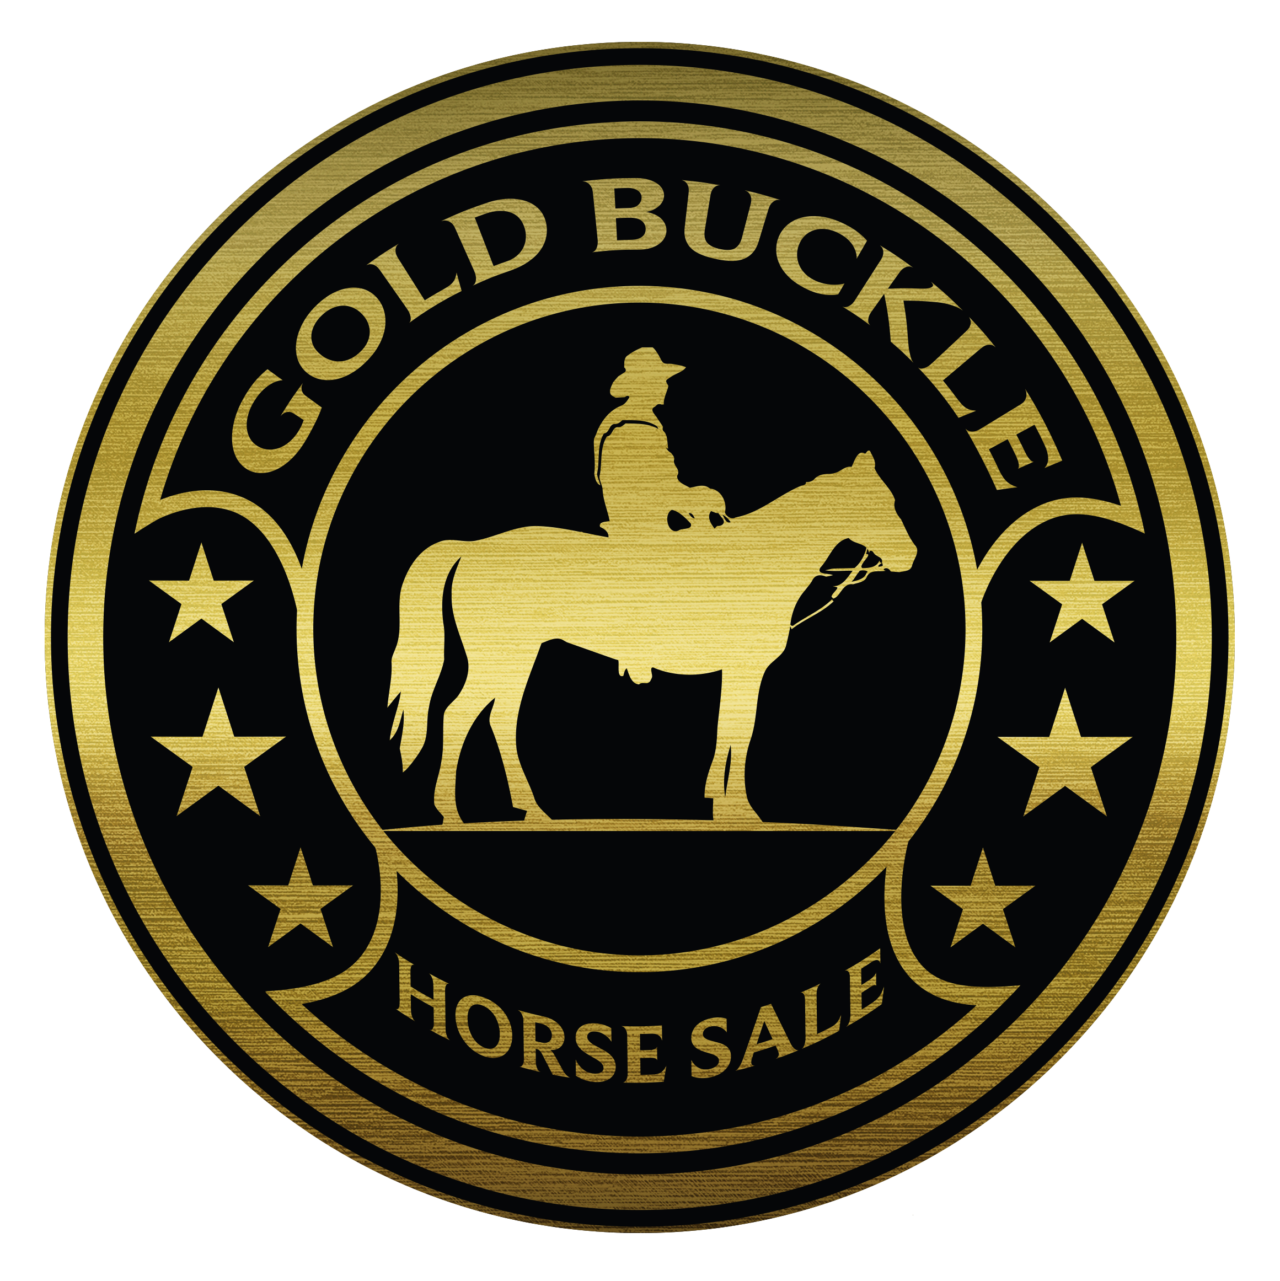 Professional Online Horse Auction | Horses for Sale - Gold Buckle Horse ...